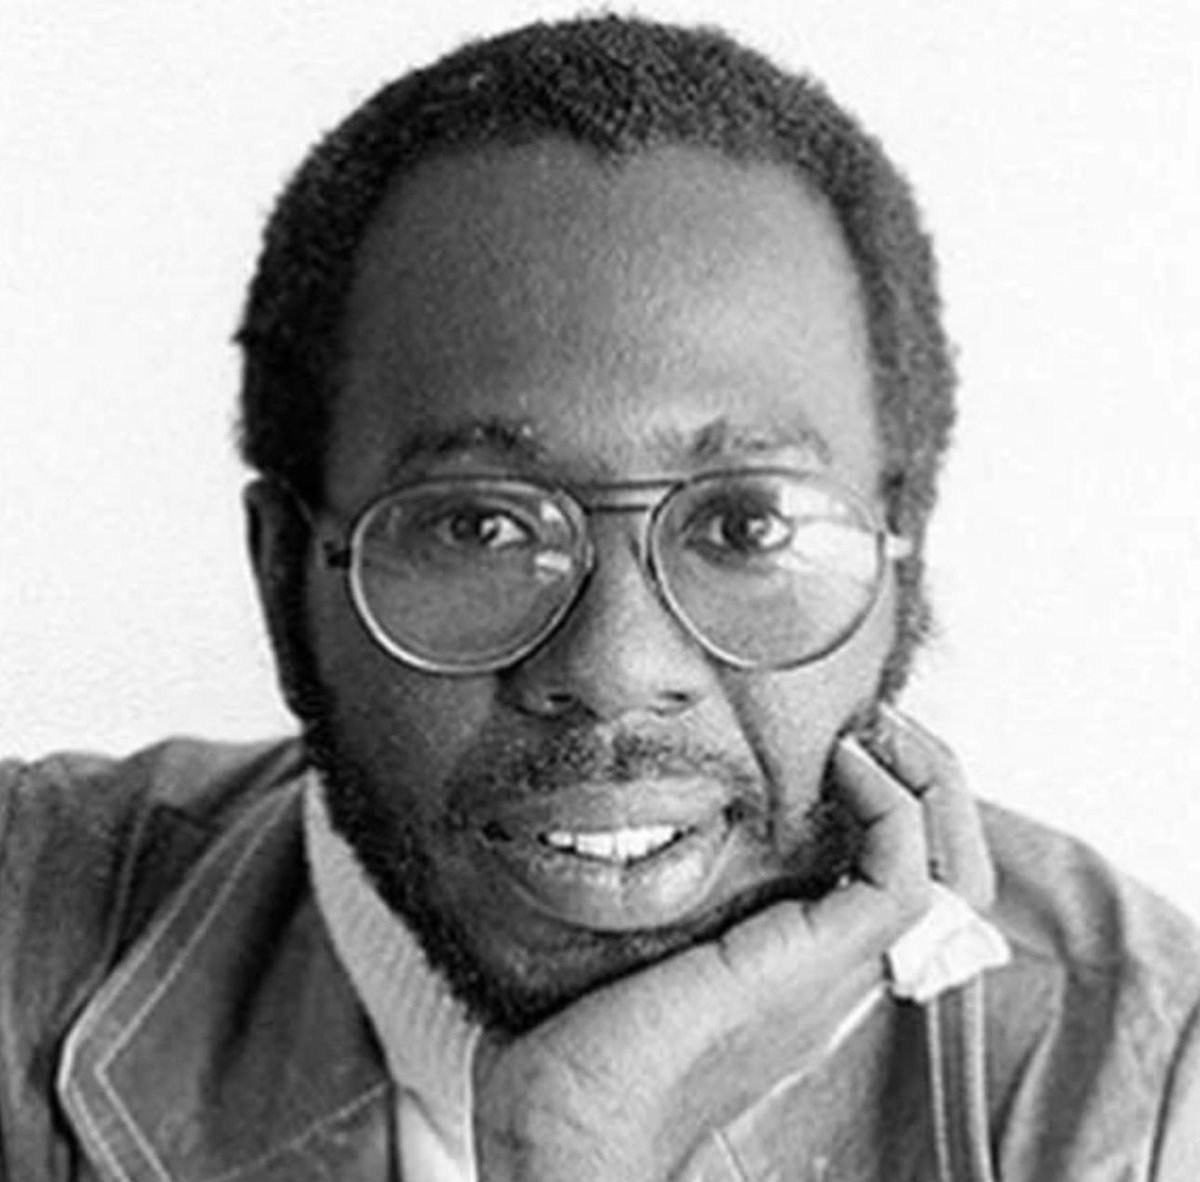 24 years ago today, @CurtisLMayfield passed away of type 2 diabetes at the age of 57 #RIPCurtisMayfield instagram.com/p/C1VAttkPcFp/